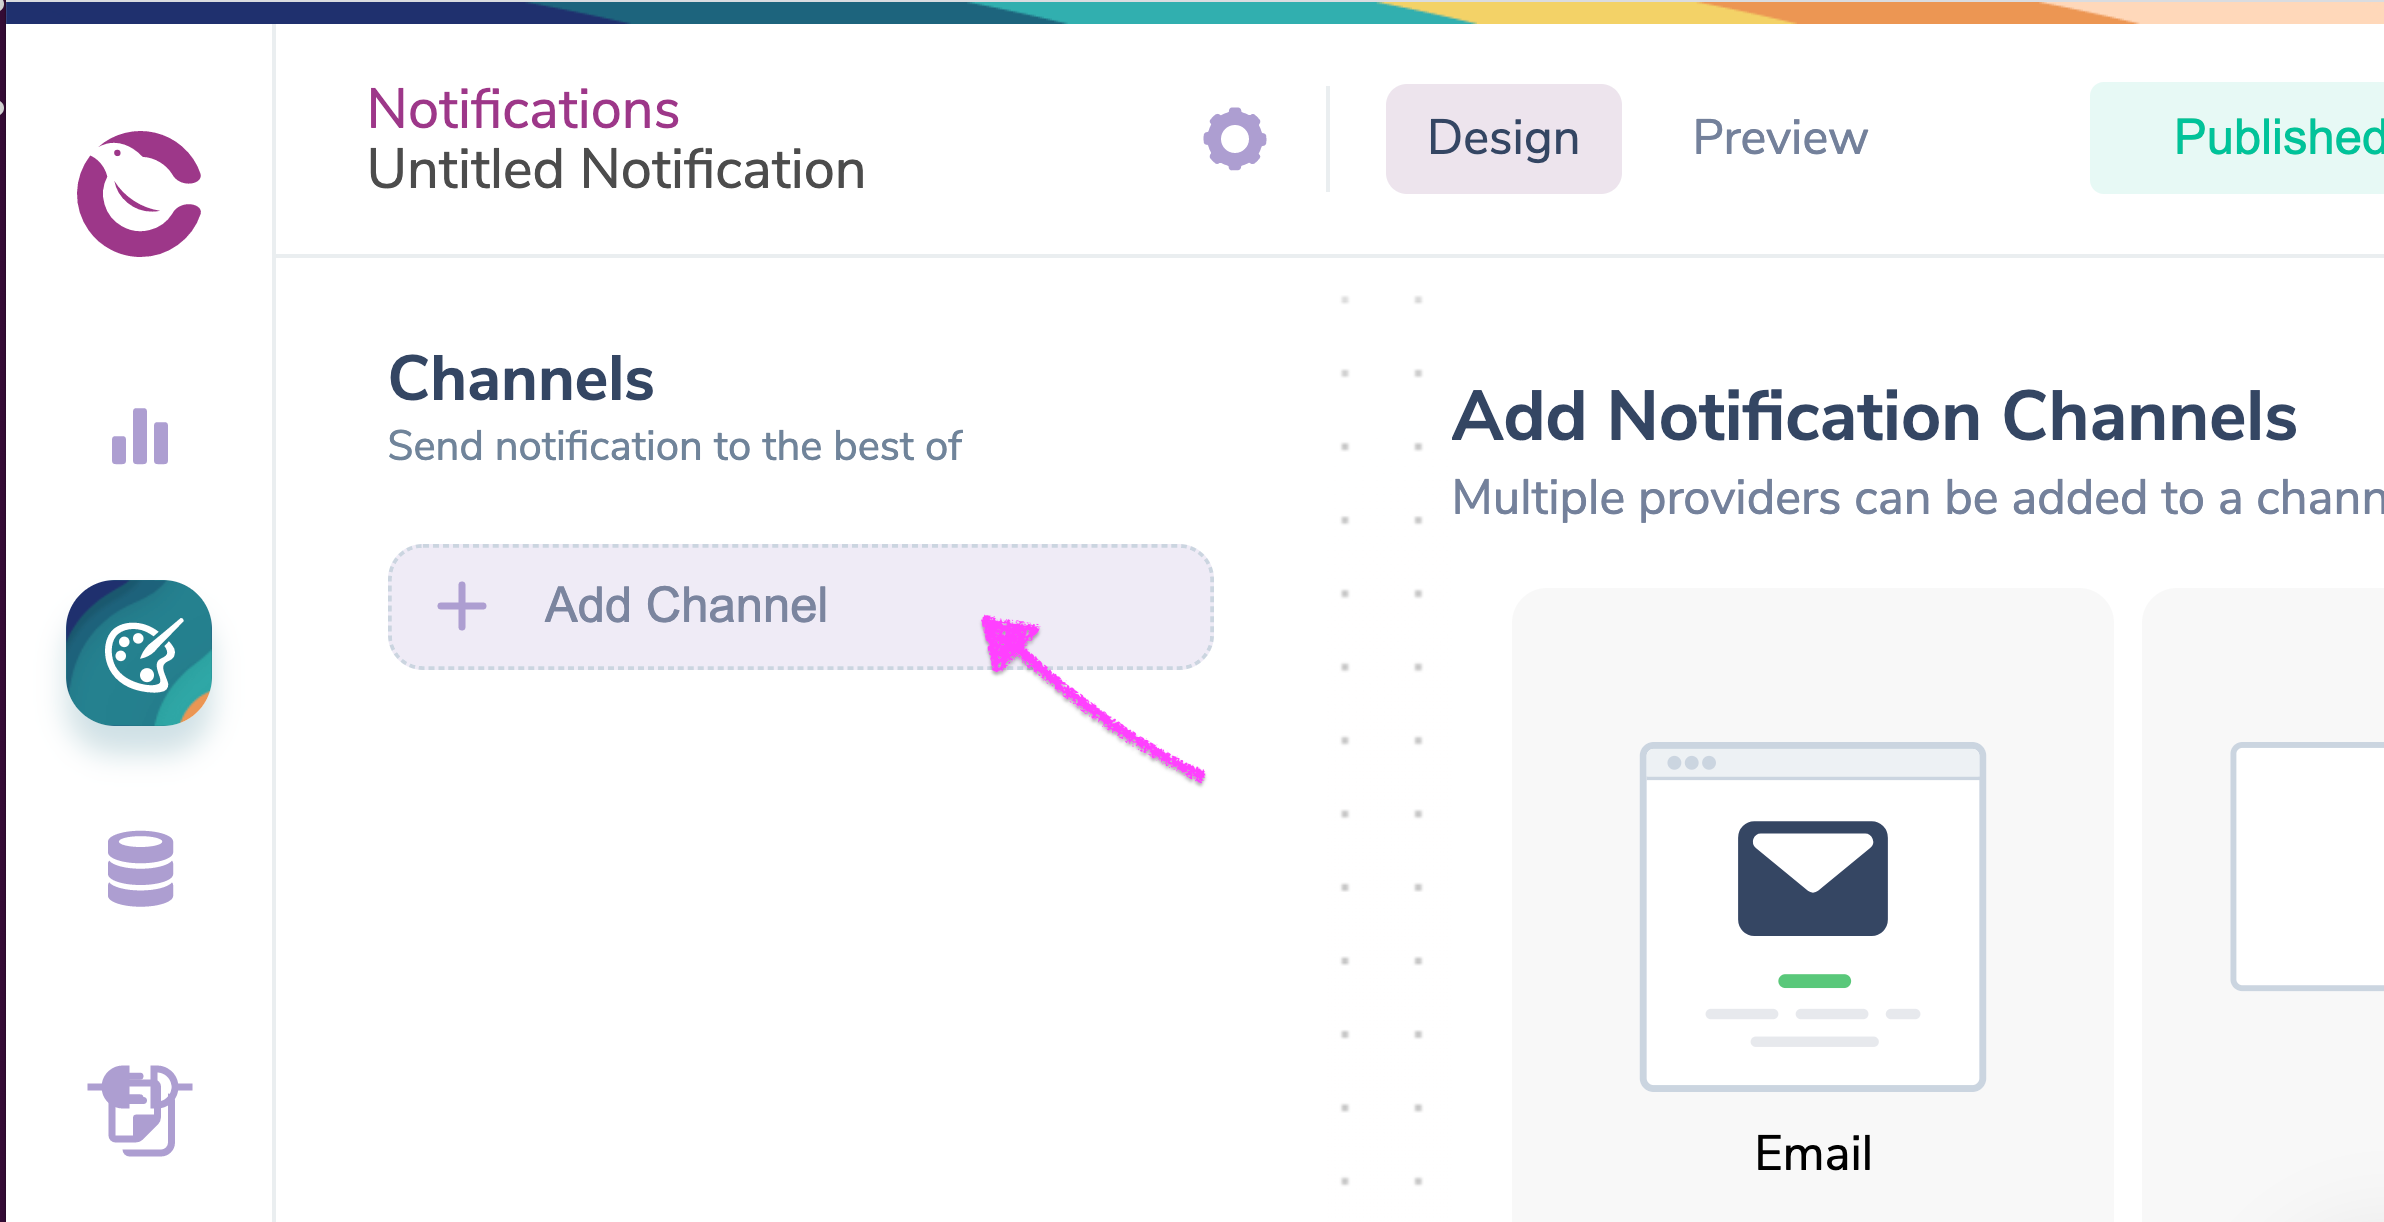 Add a Channel to Your Notification